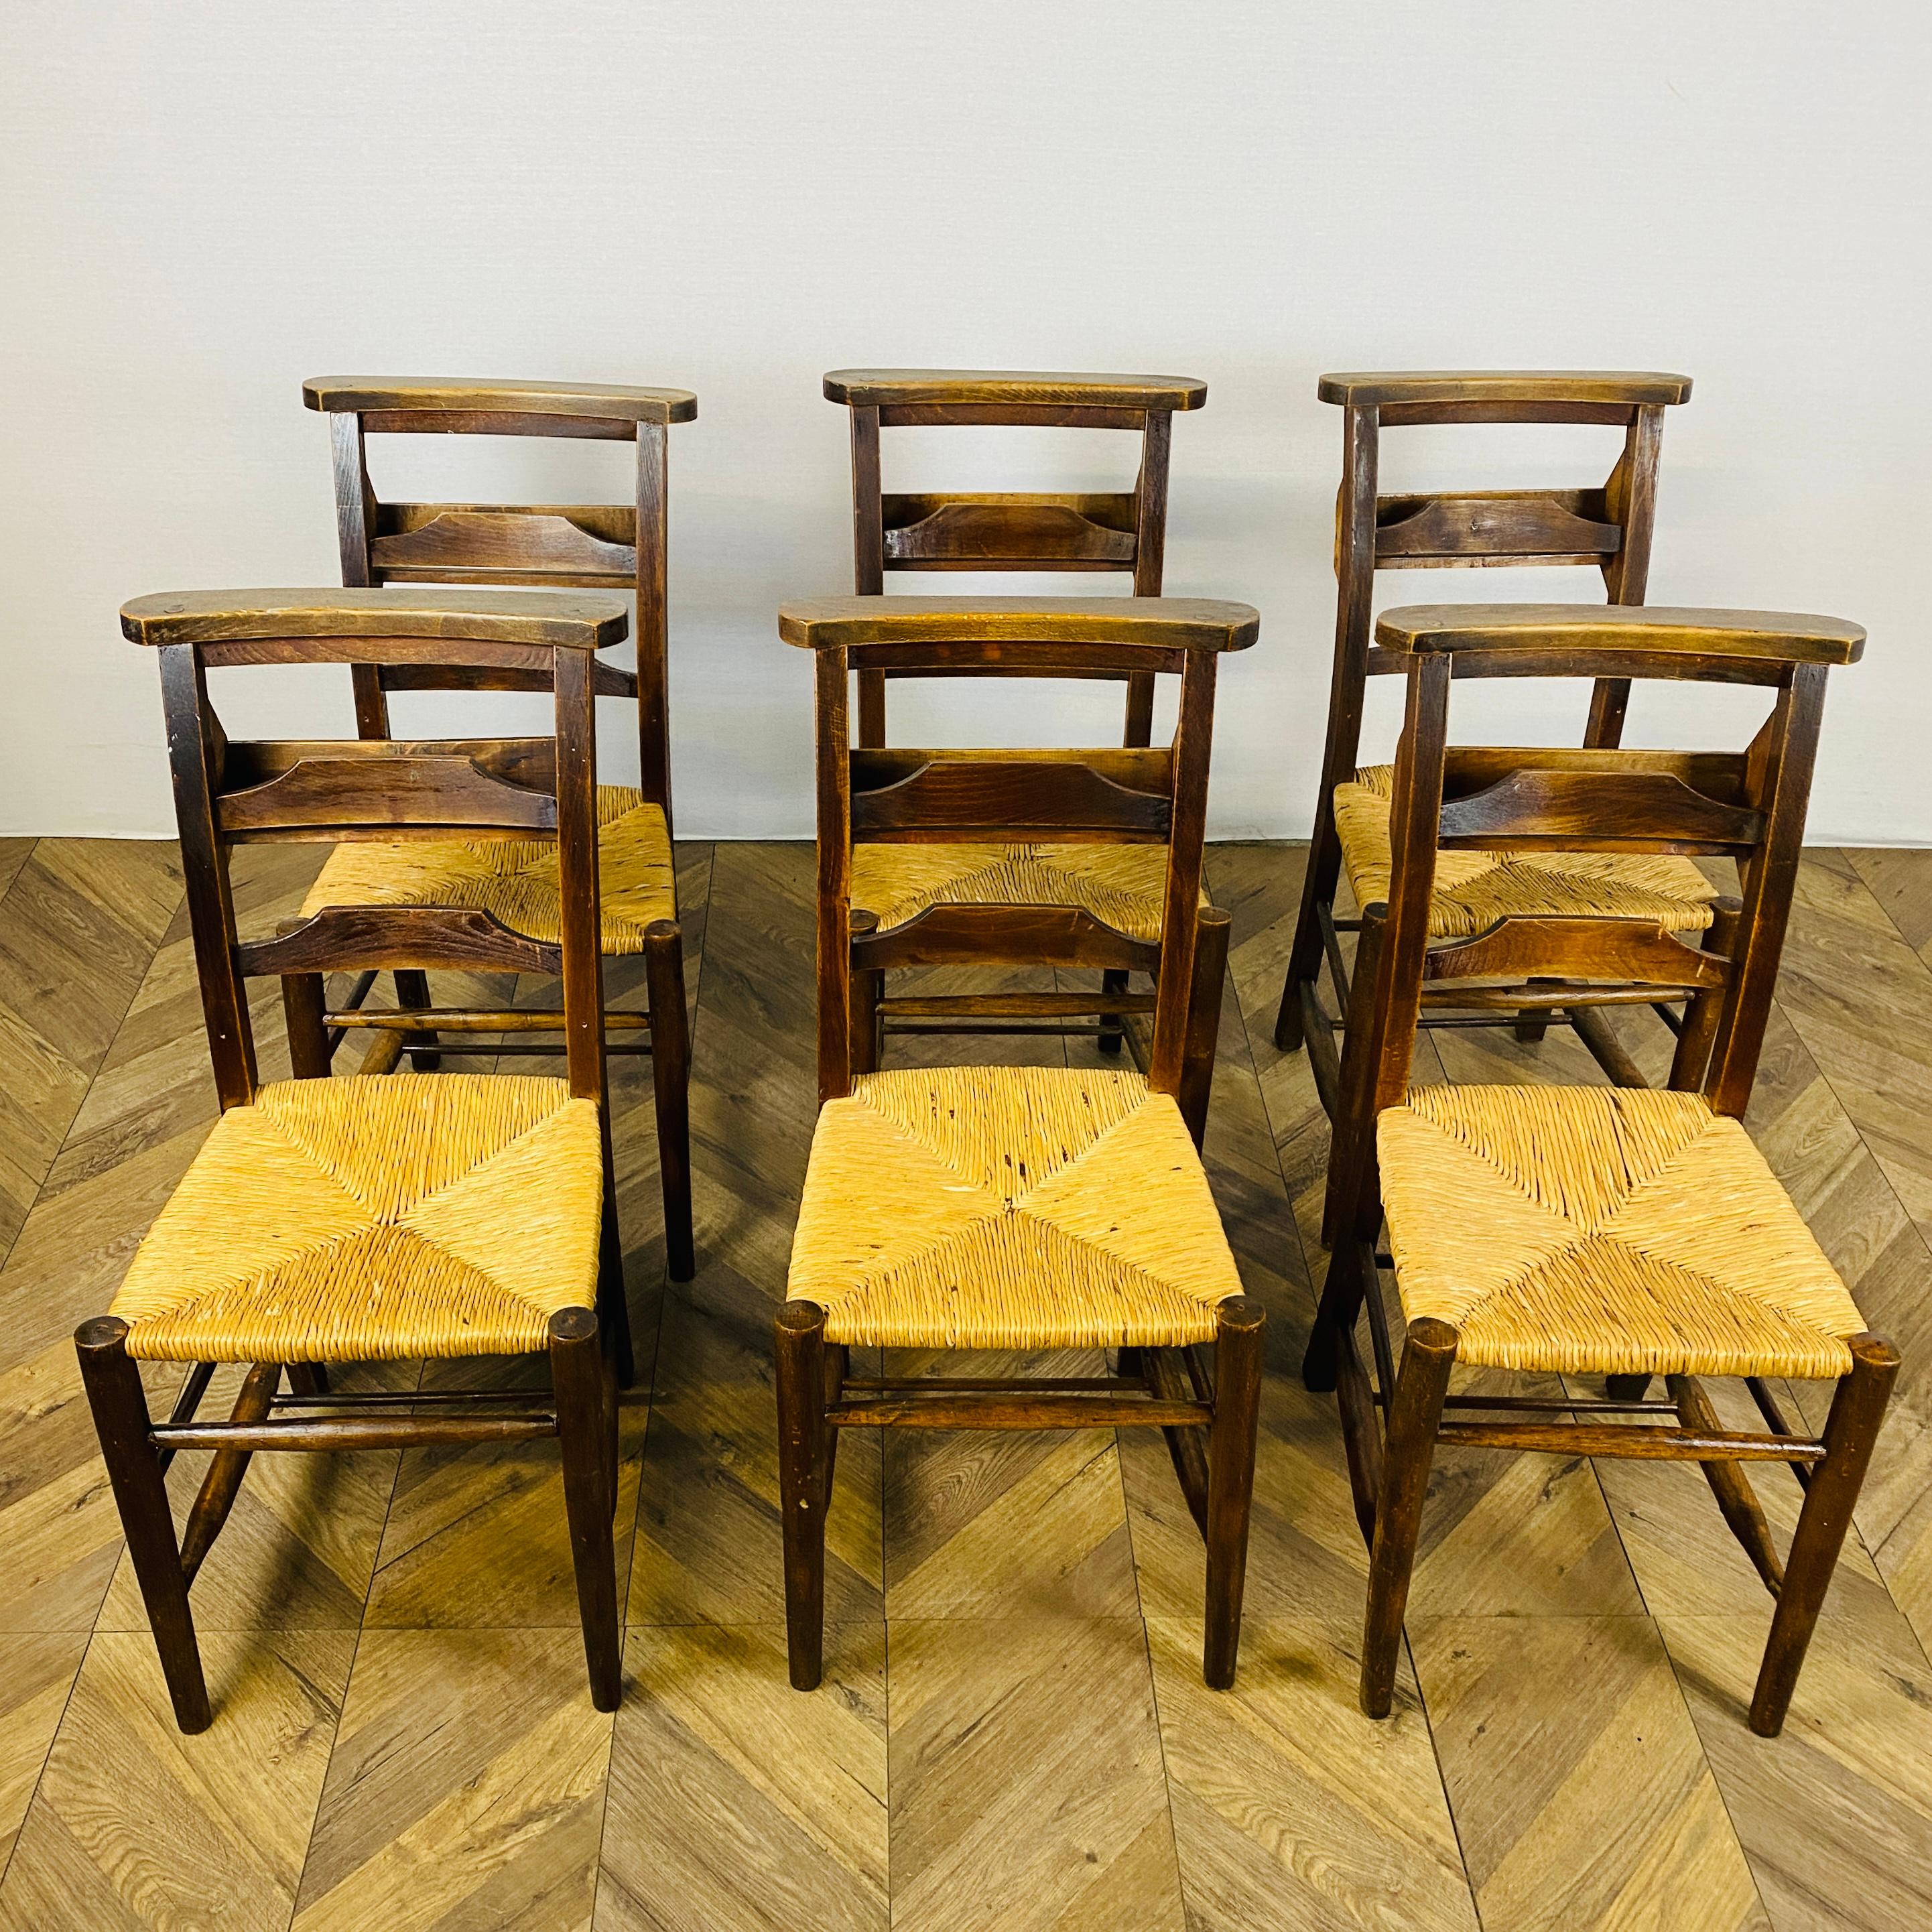 Antique English Oak Chapel / Dining Chairs, Set of 6, circa Late 19th Century.

The chairs are constructed in solid oak with shaped backs and rush seats, with a rich patina.
The chair frames are in sturdy condition as are the rush seats, but do